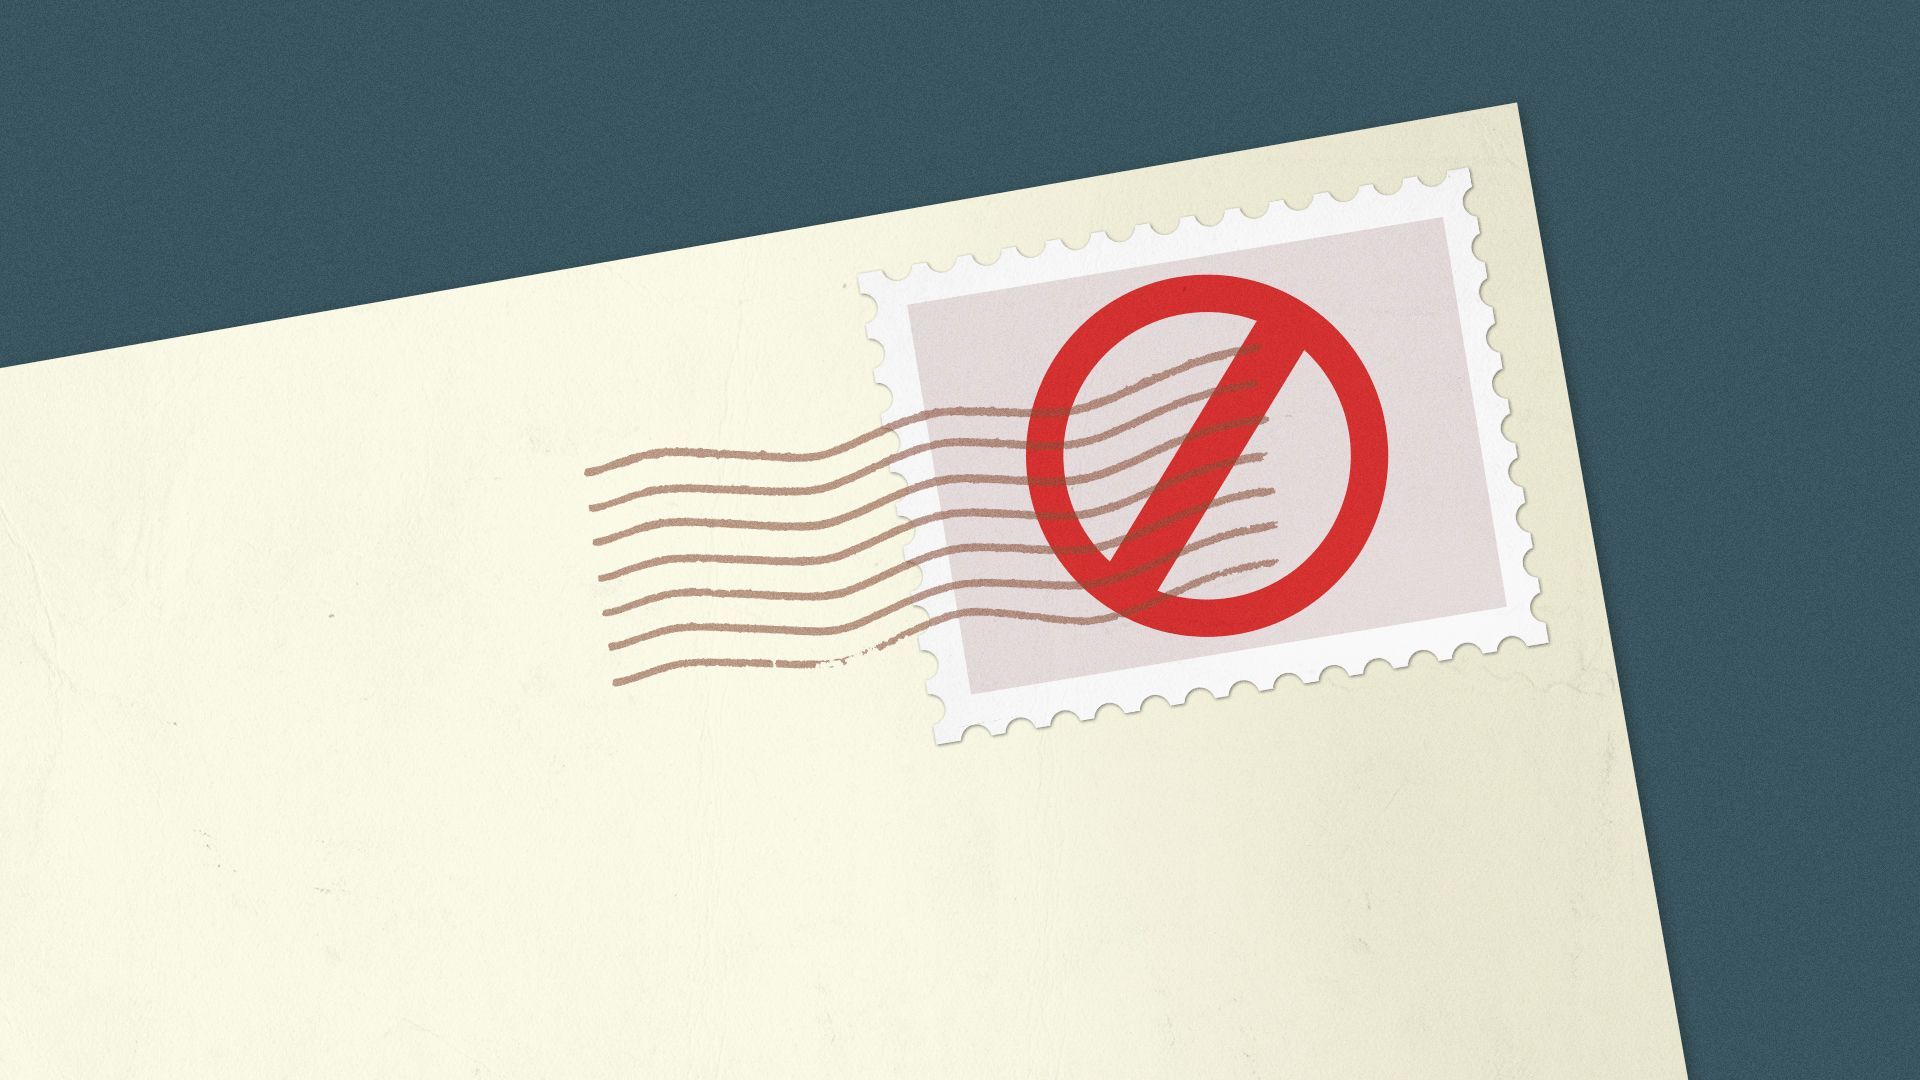 Illustration of an envelope with a stamp that has the "No" symbol.